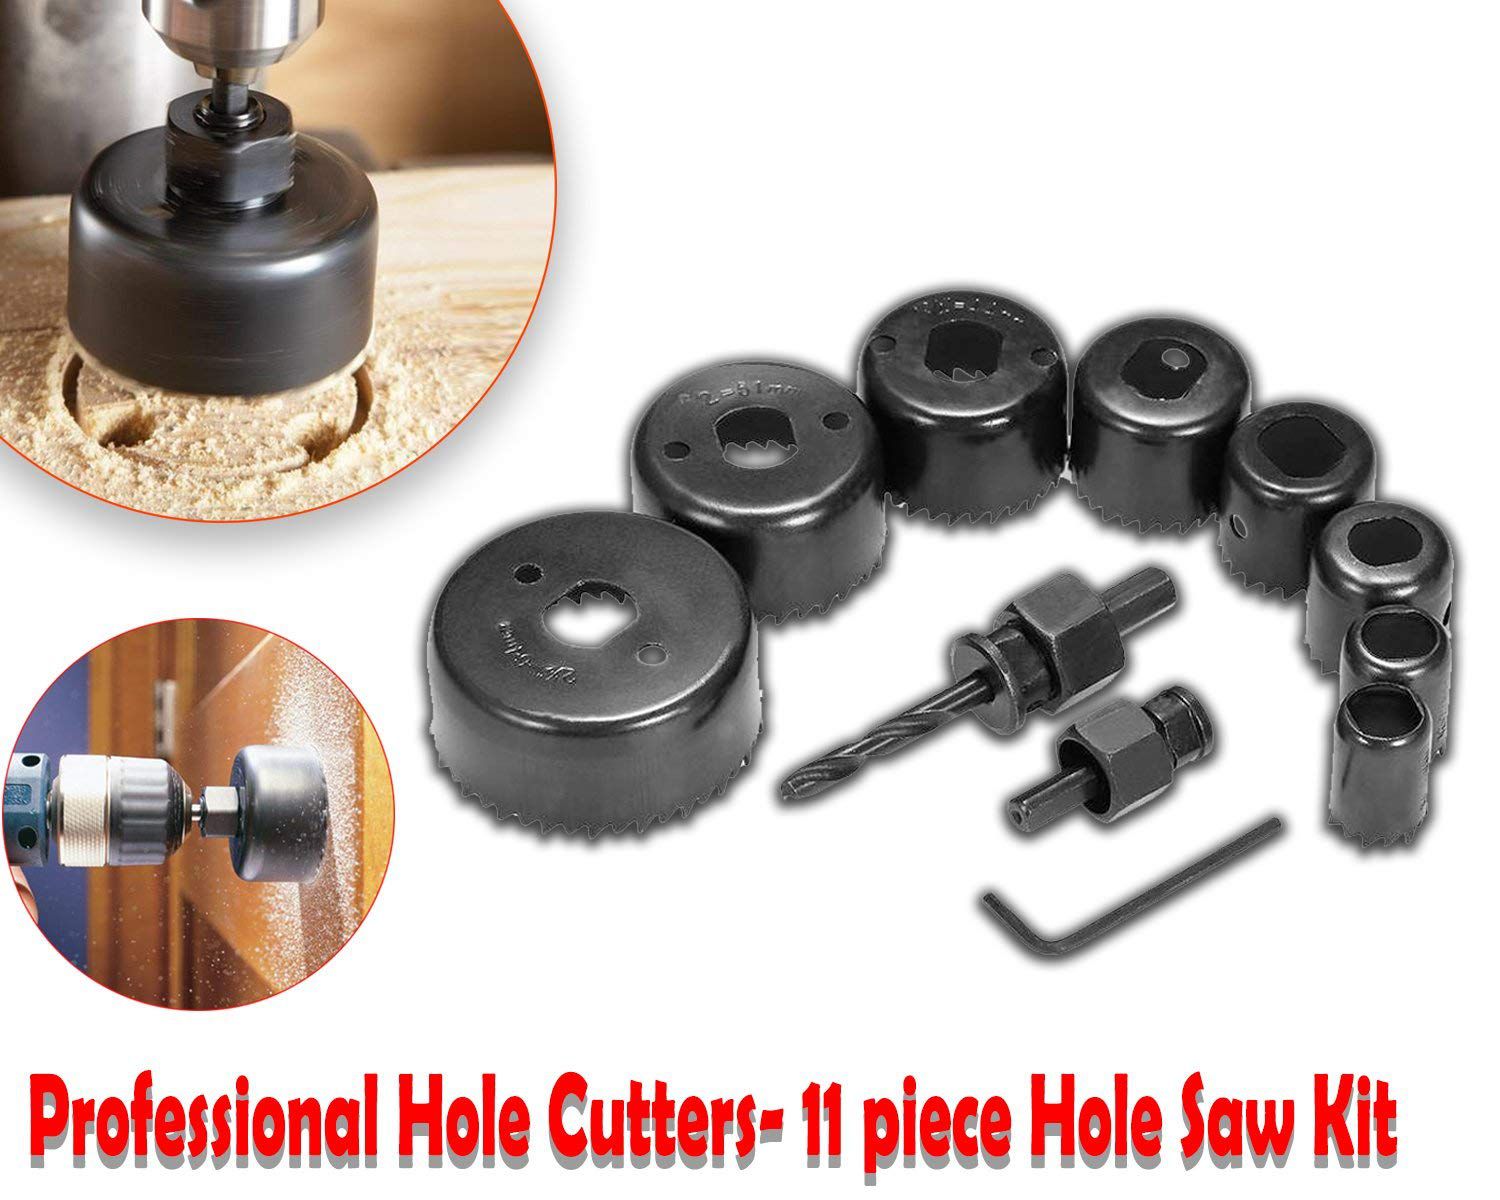 AAS Hole Saw Cutter Set (Multicolor, 11-Pieces)